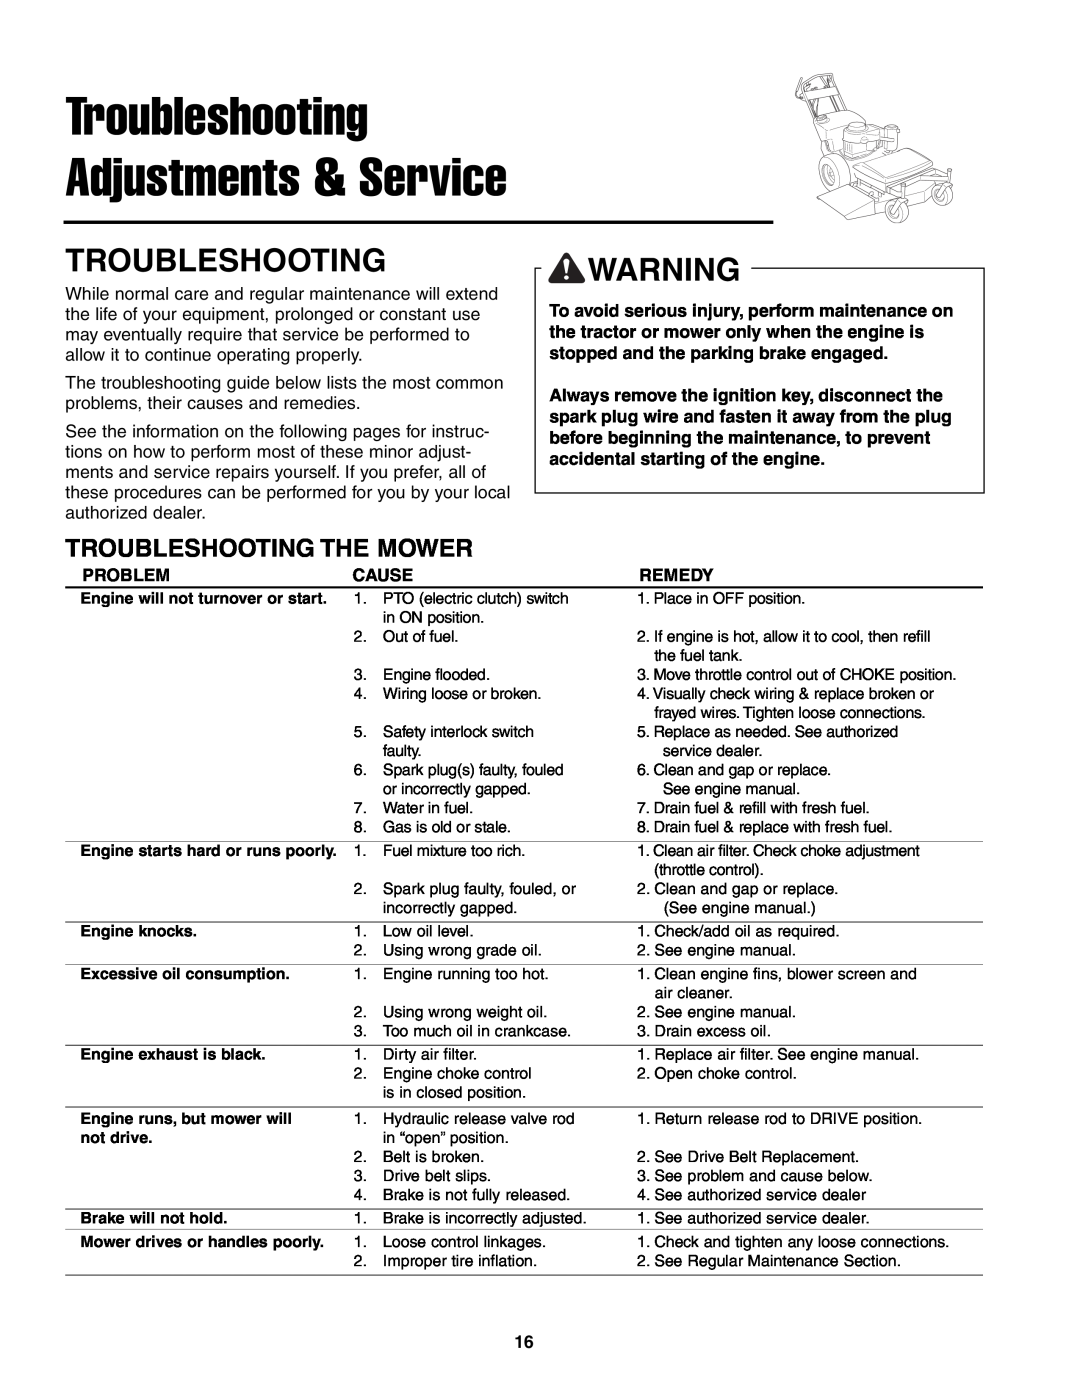 Snapper SFH13320KW important safety instructions Troubleshooting The Mower, Troubleshooting Adjustments & Service 